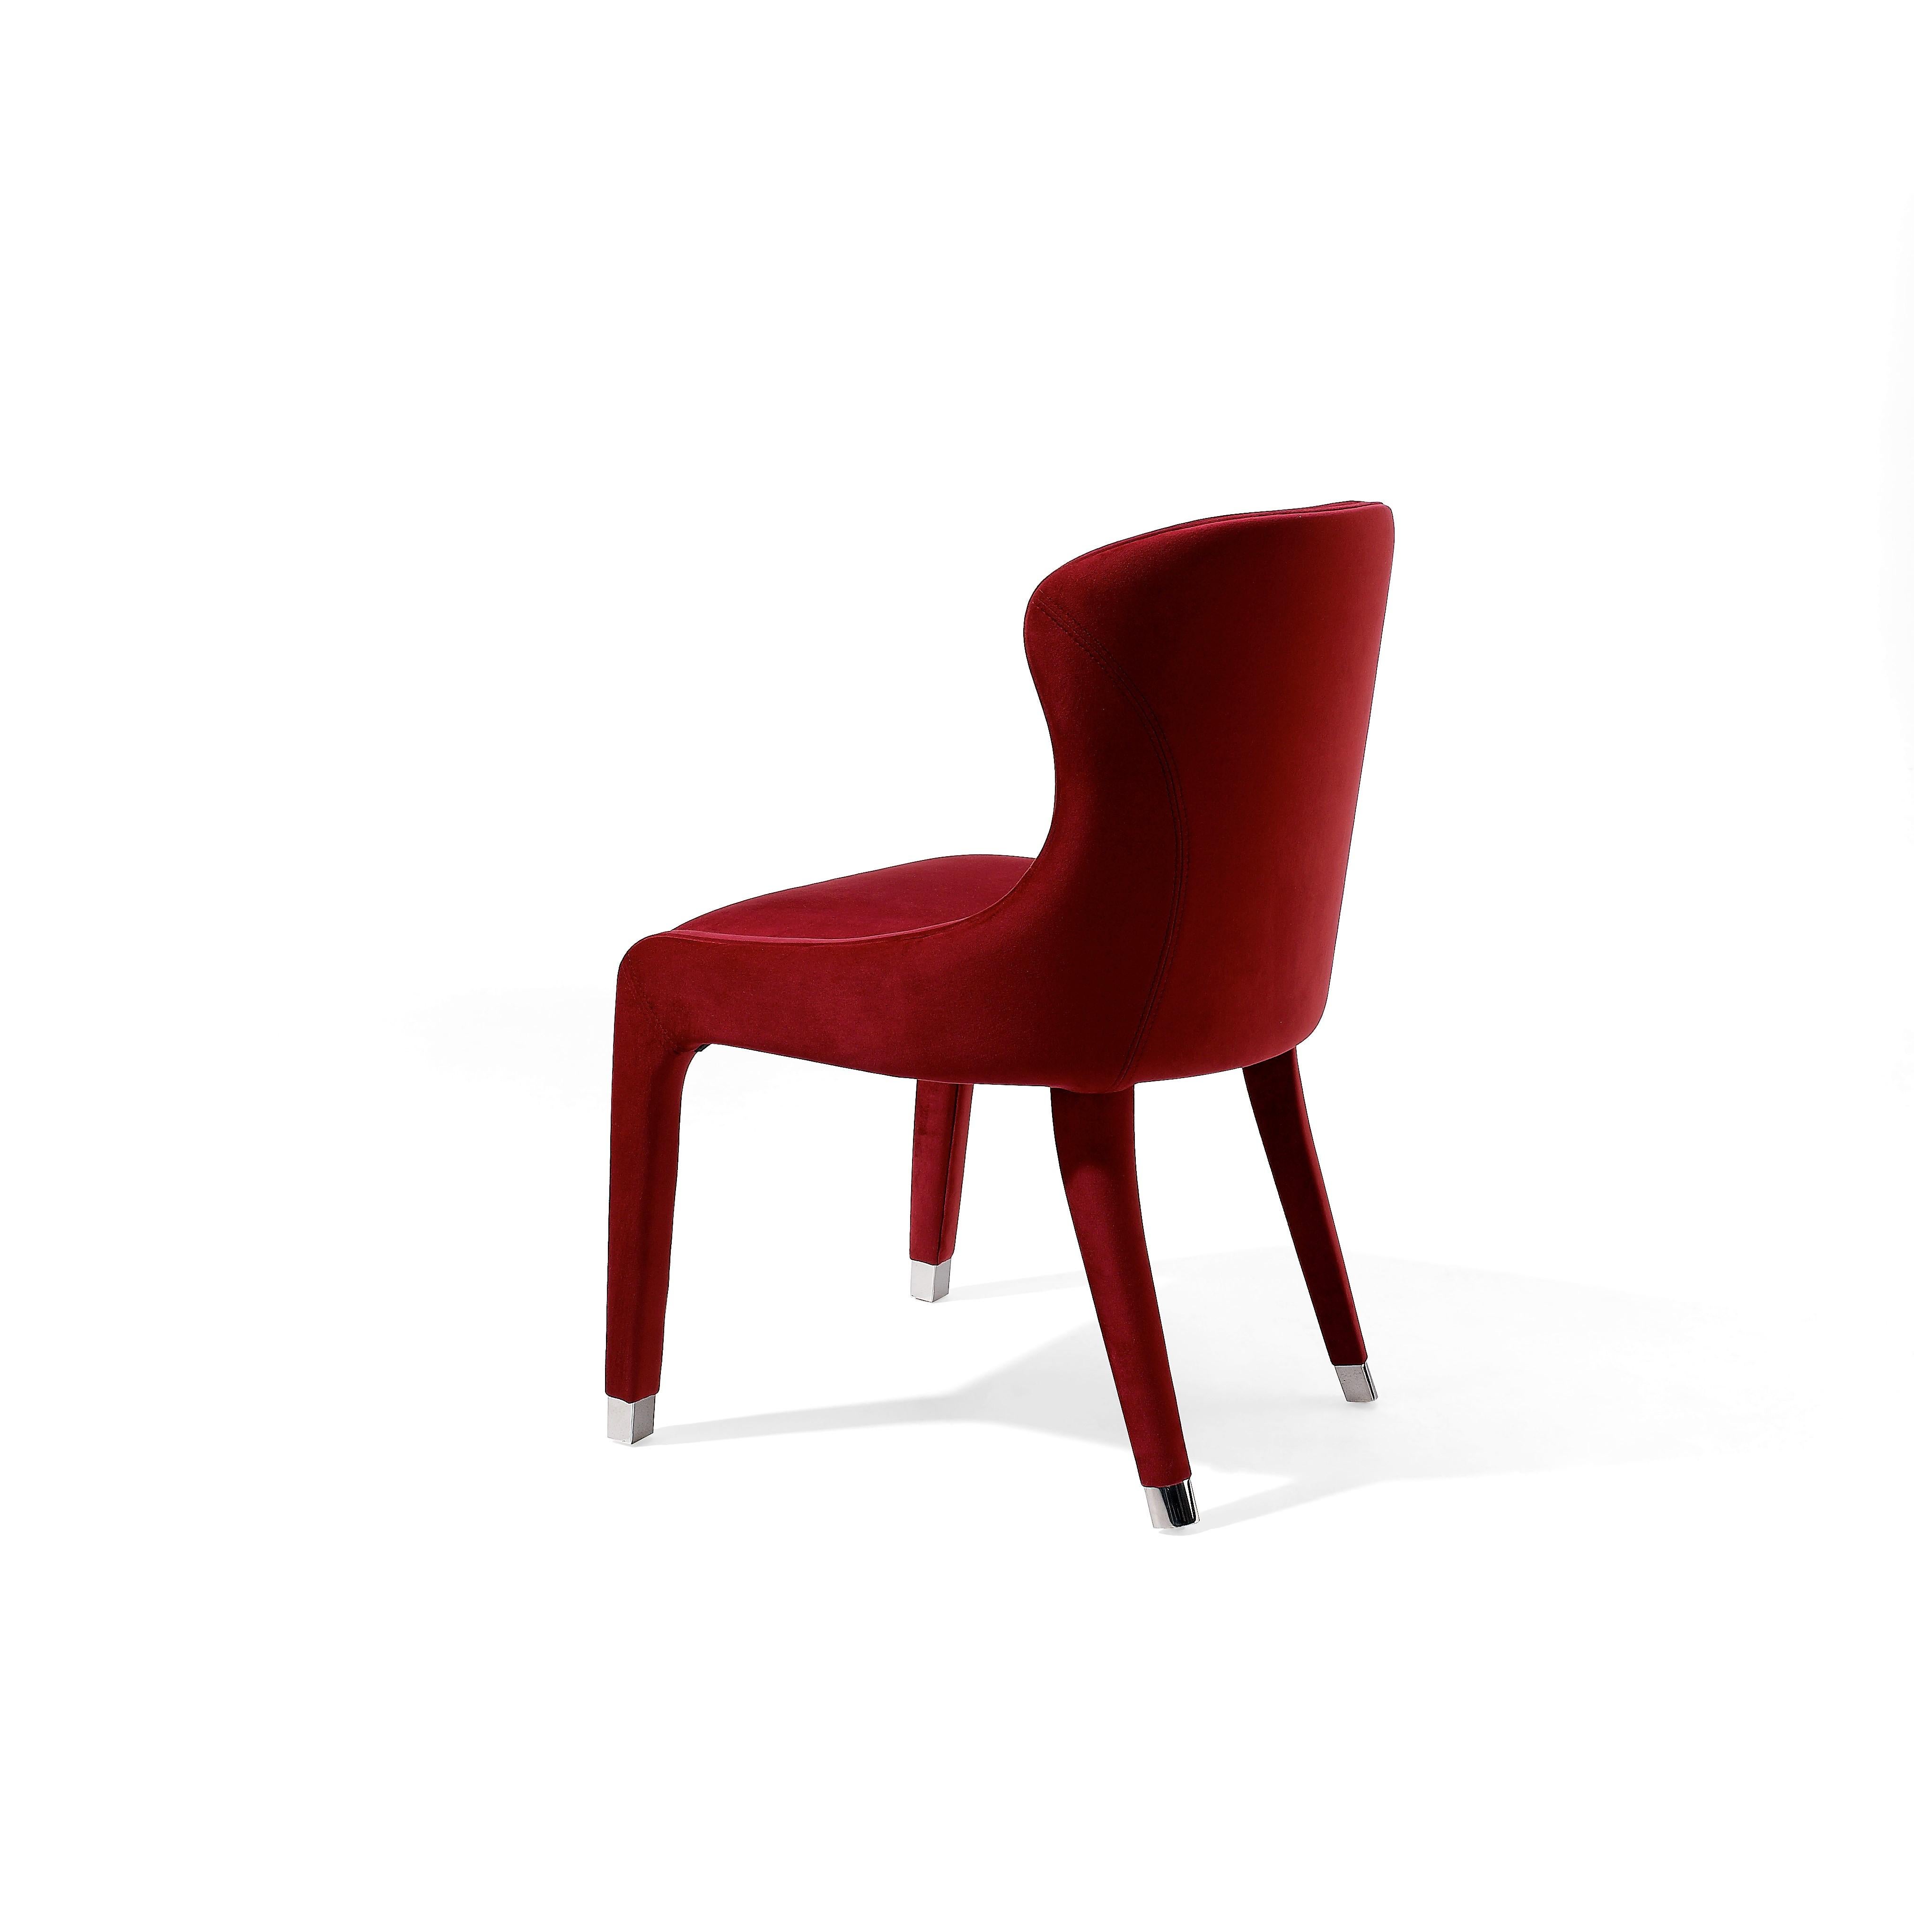 Fully upholstered dining chair in deep red velvet.
Stainless steel caps in polished chrome.
100% European handmade product.
Available in COM and other velvet and metal finishes.
“Minimum order of 4 chairs.”
Contact us to enquire about COM/COL